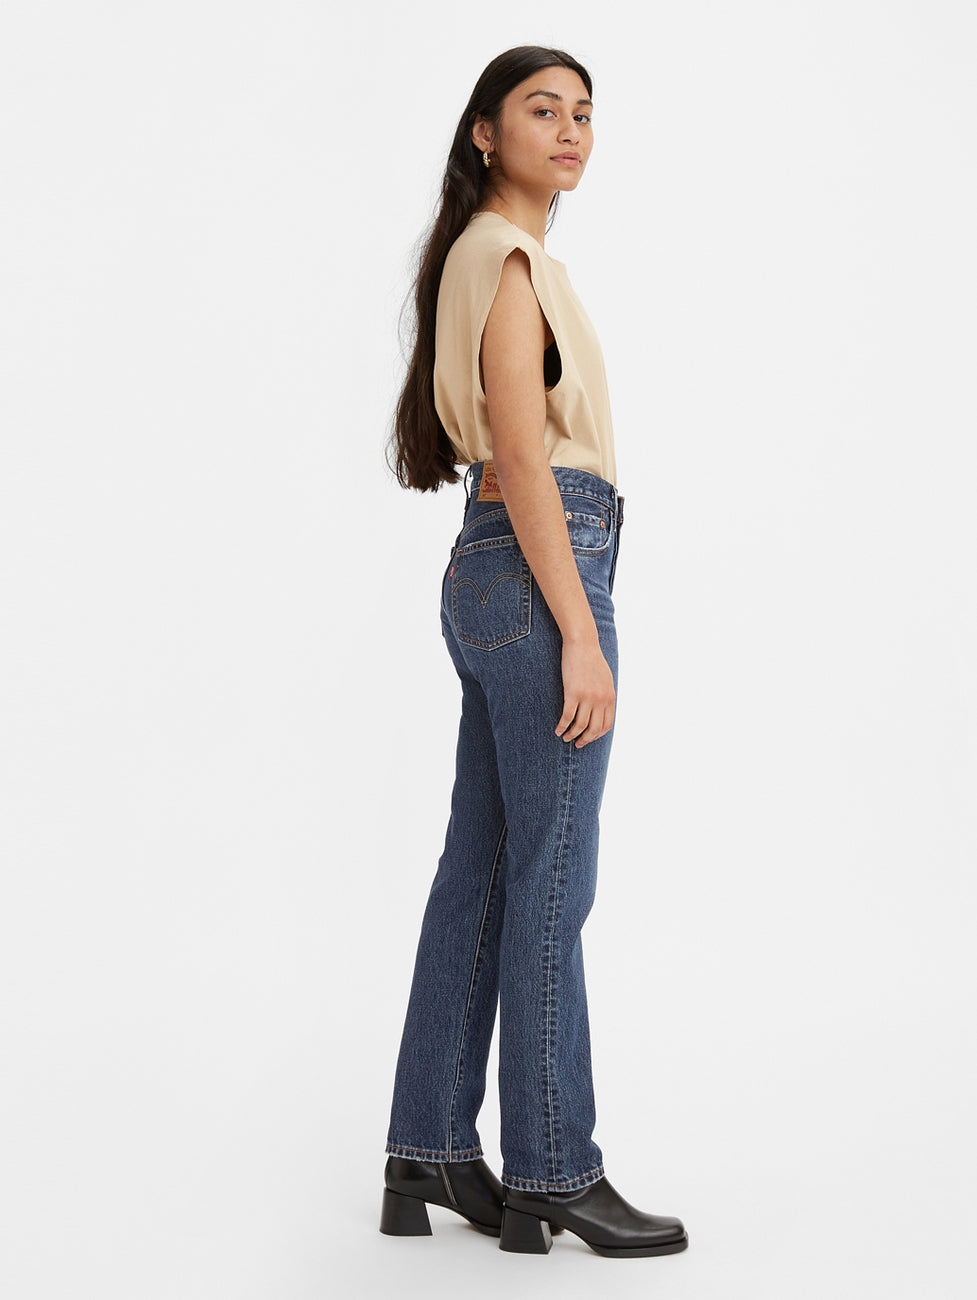 Women's High Rise 501 Regular Fit Jeans – Levis India Store